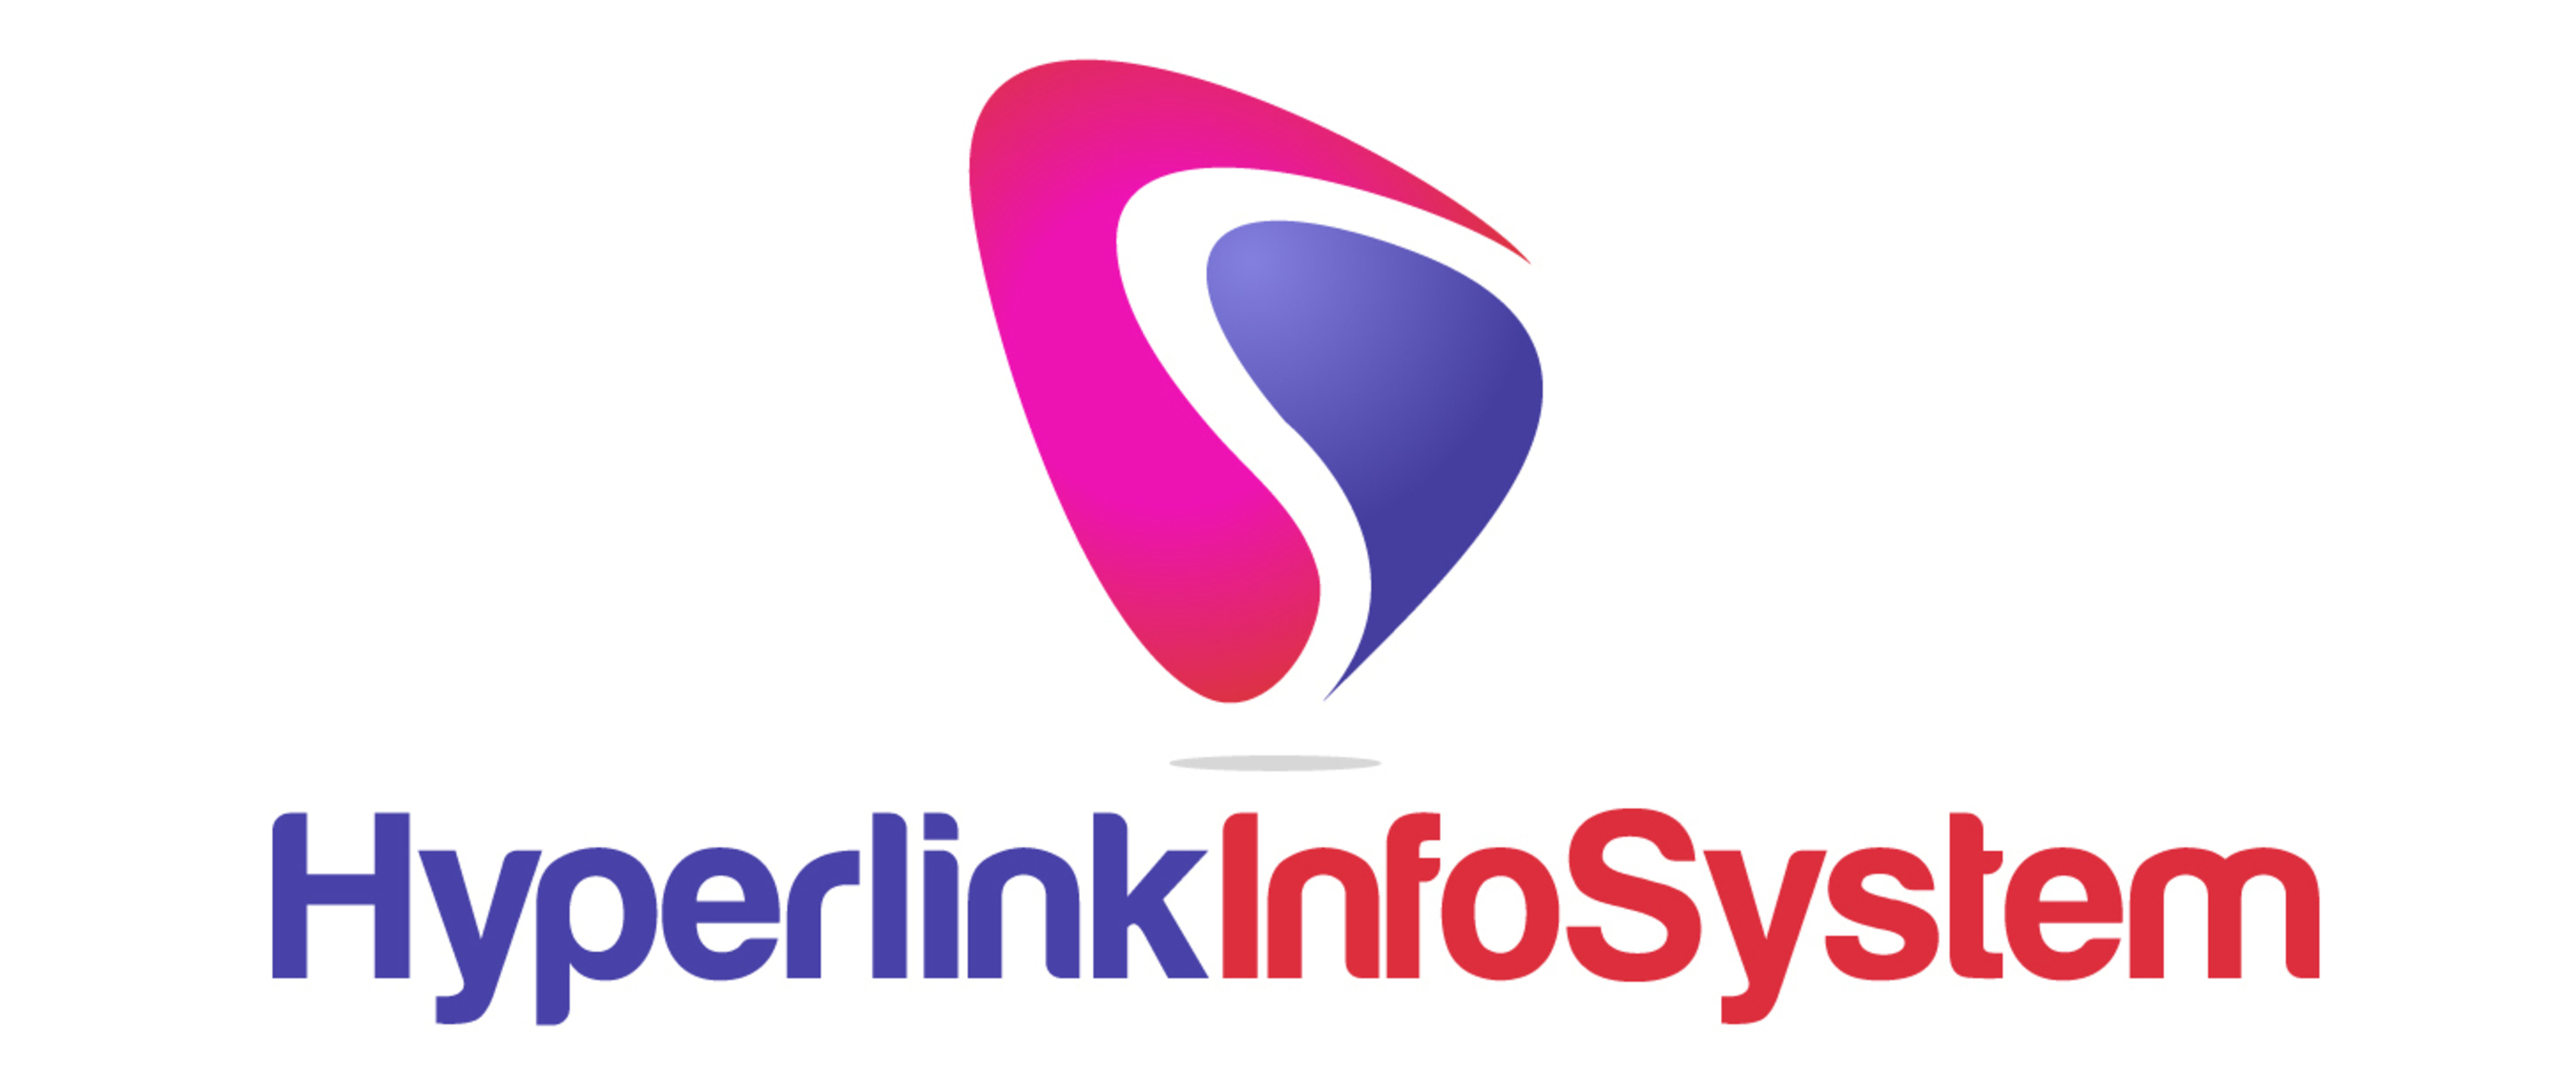 mobile app development company hyperlink infosystem reveals cost and time frame to build an app in 2018